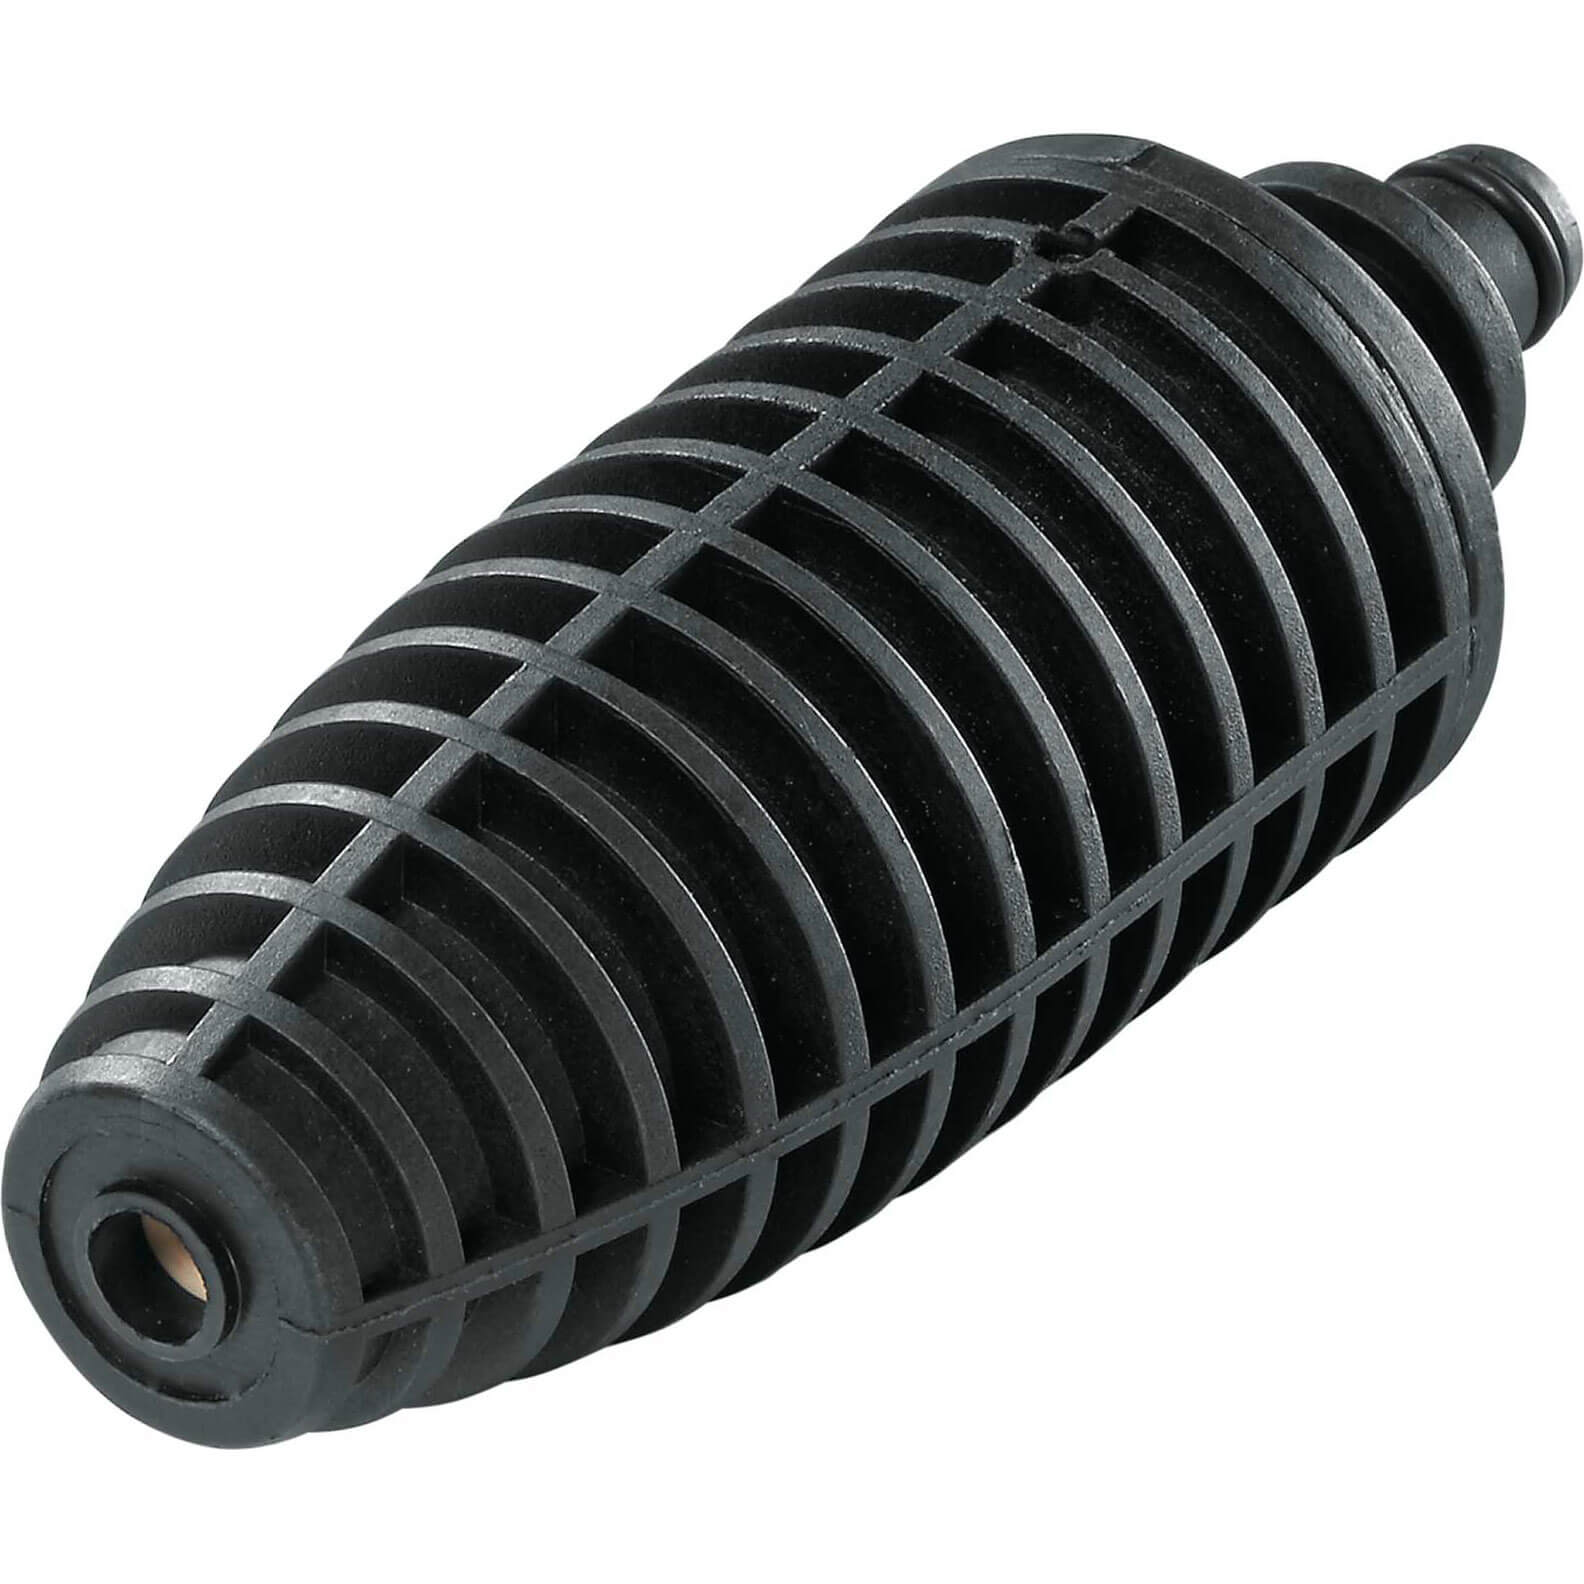 Image of Bosch Rotary Nozzle for AQT Pressure Washers